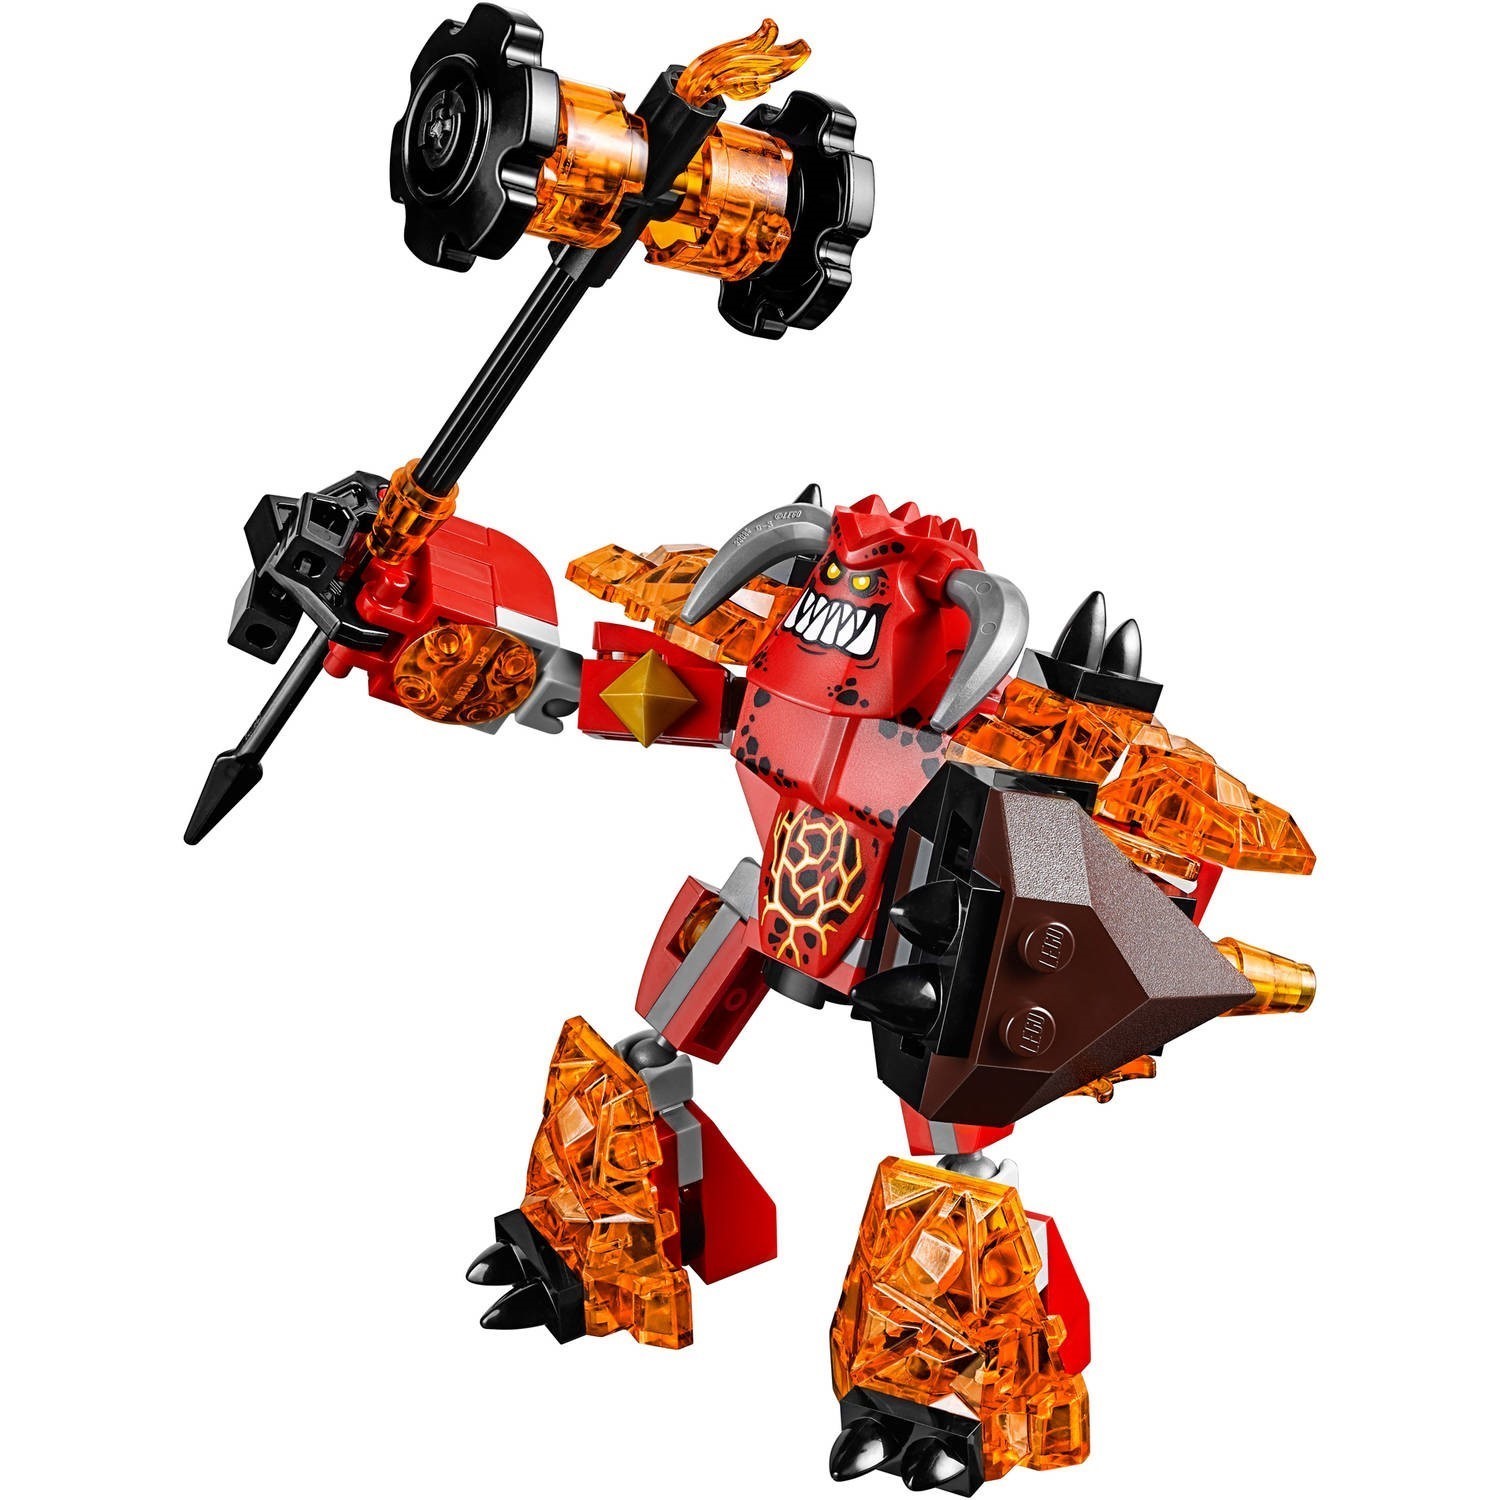 LEGO NEXO KNIGHTS Axl's Tower Carrier, 70322 - image 5 of 6